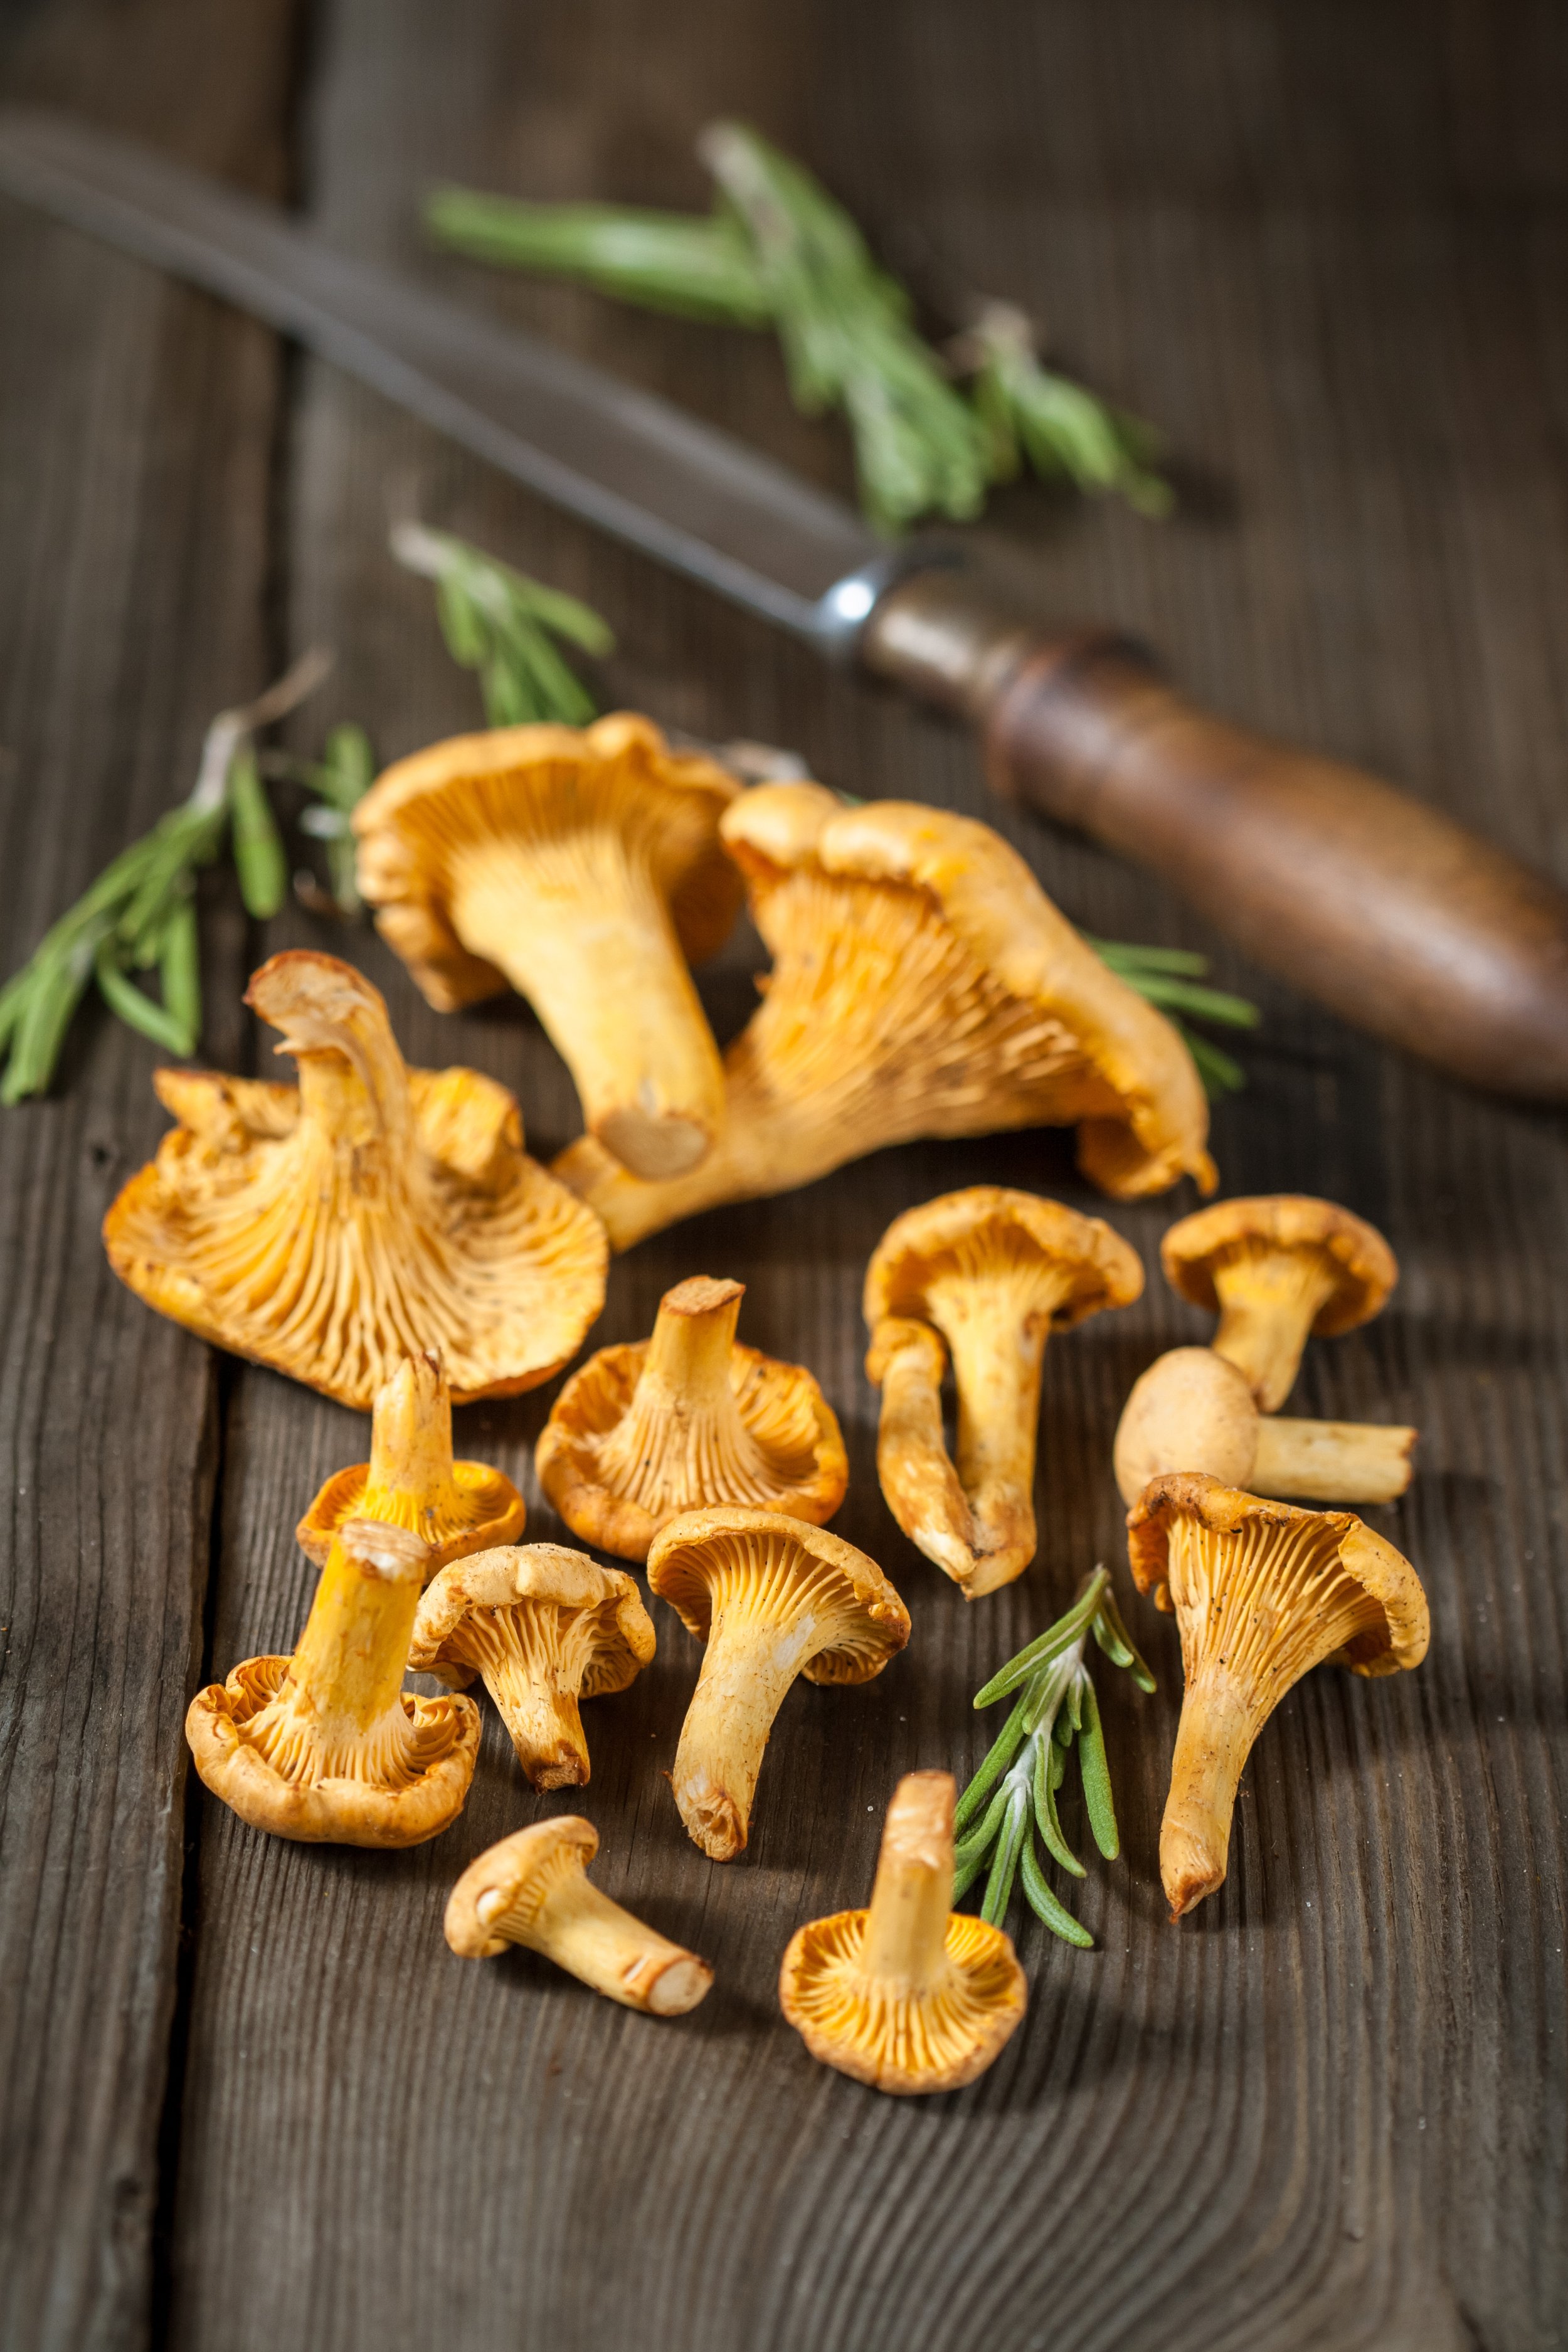 vecteezy_fresh-chanterelle-mushrooms-on-a-wooden-table-with-knife-close-up_1322308.jpg